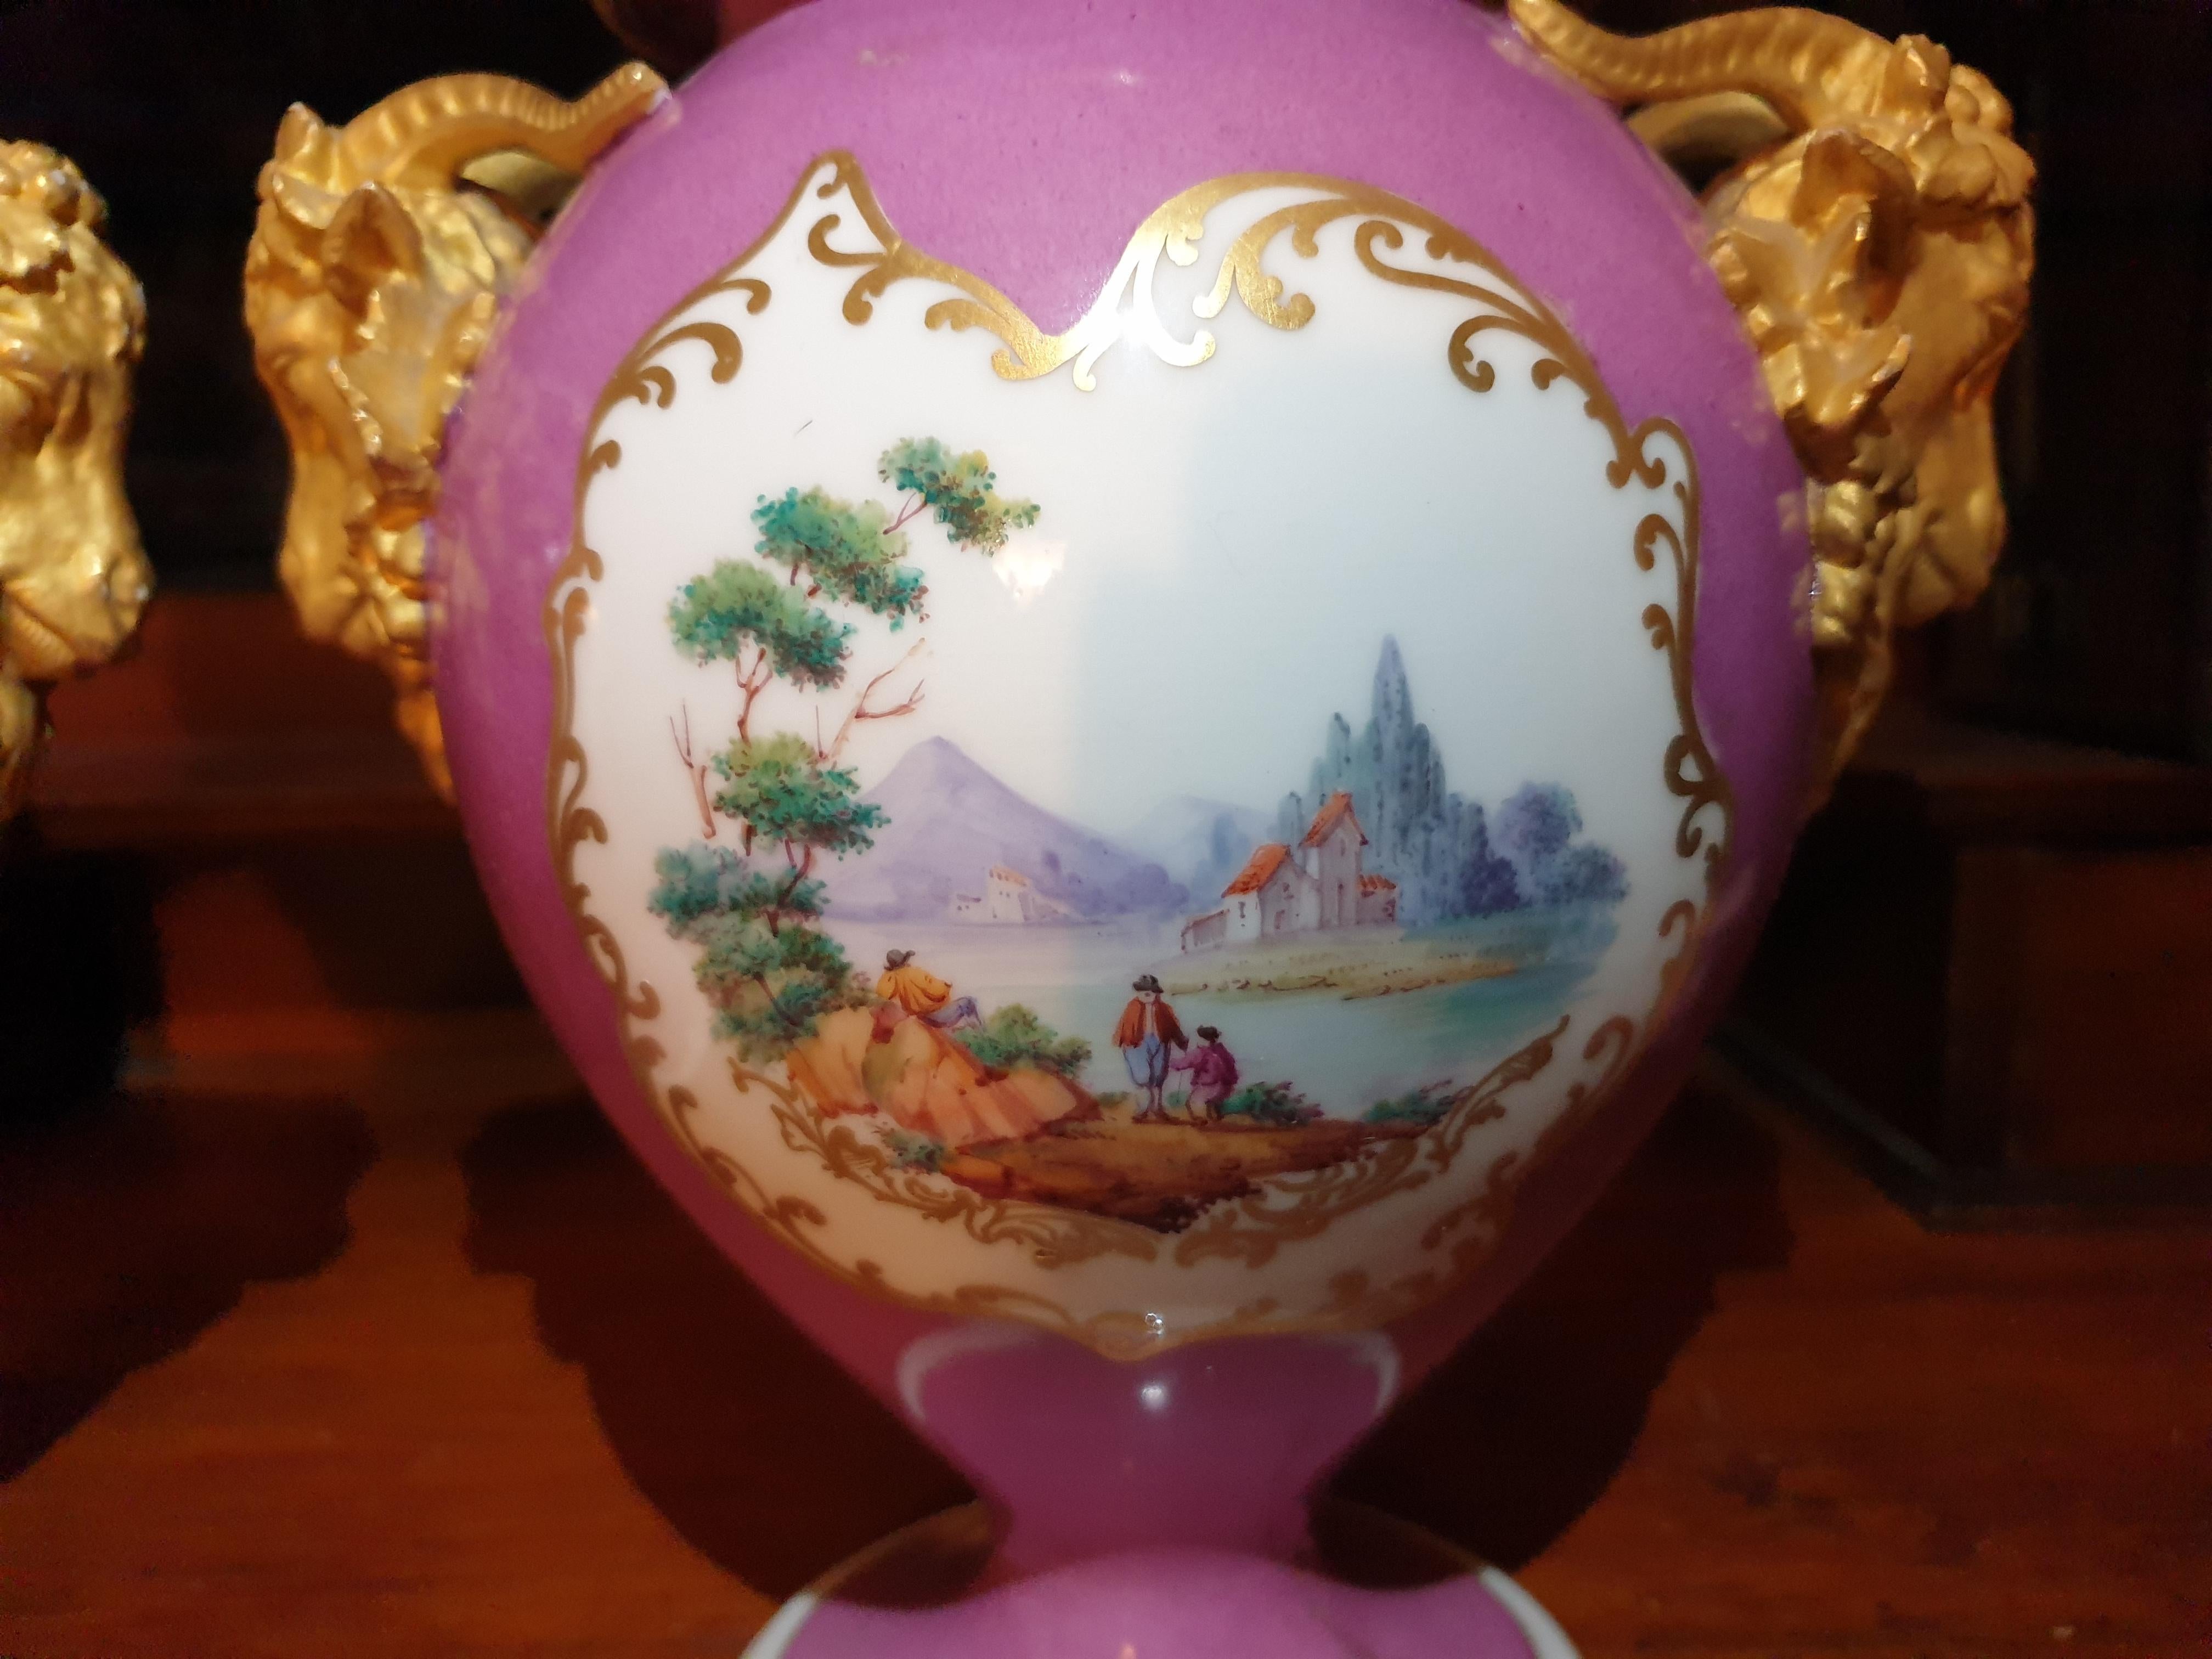 A unique pair of 24k gilt golden Staffordshire made ram handled pink plump vases. Hand painted with scenes on either side with heavy gilding on the vases, fine quality pair of vases that dates from 1850's in perfect condition.